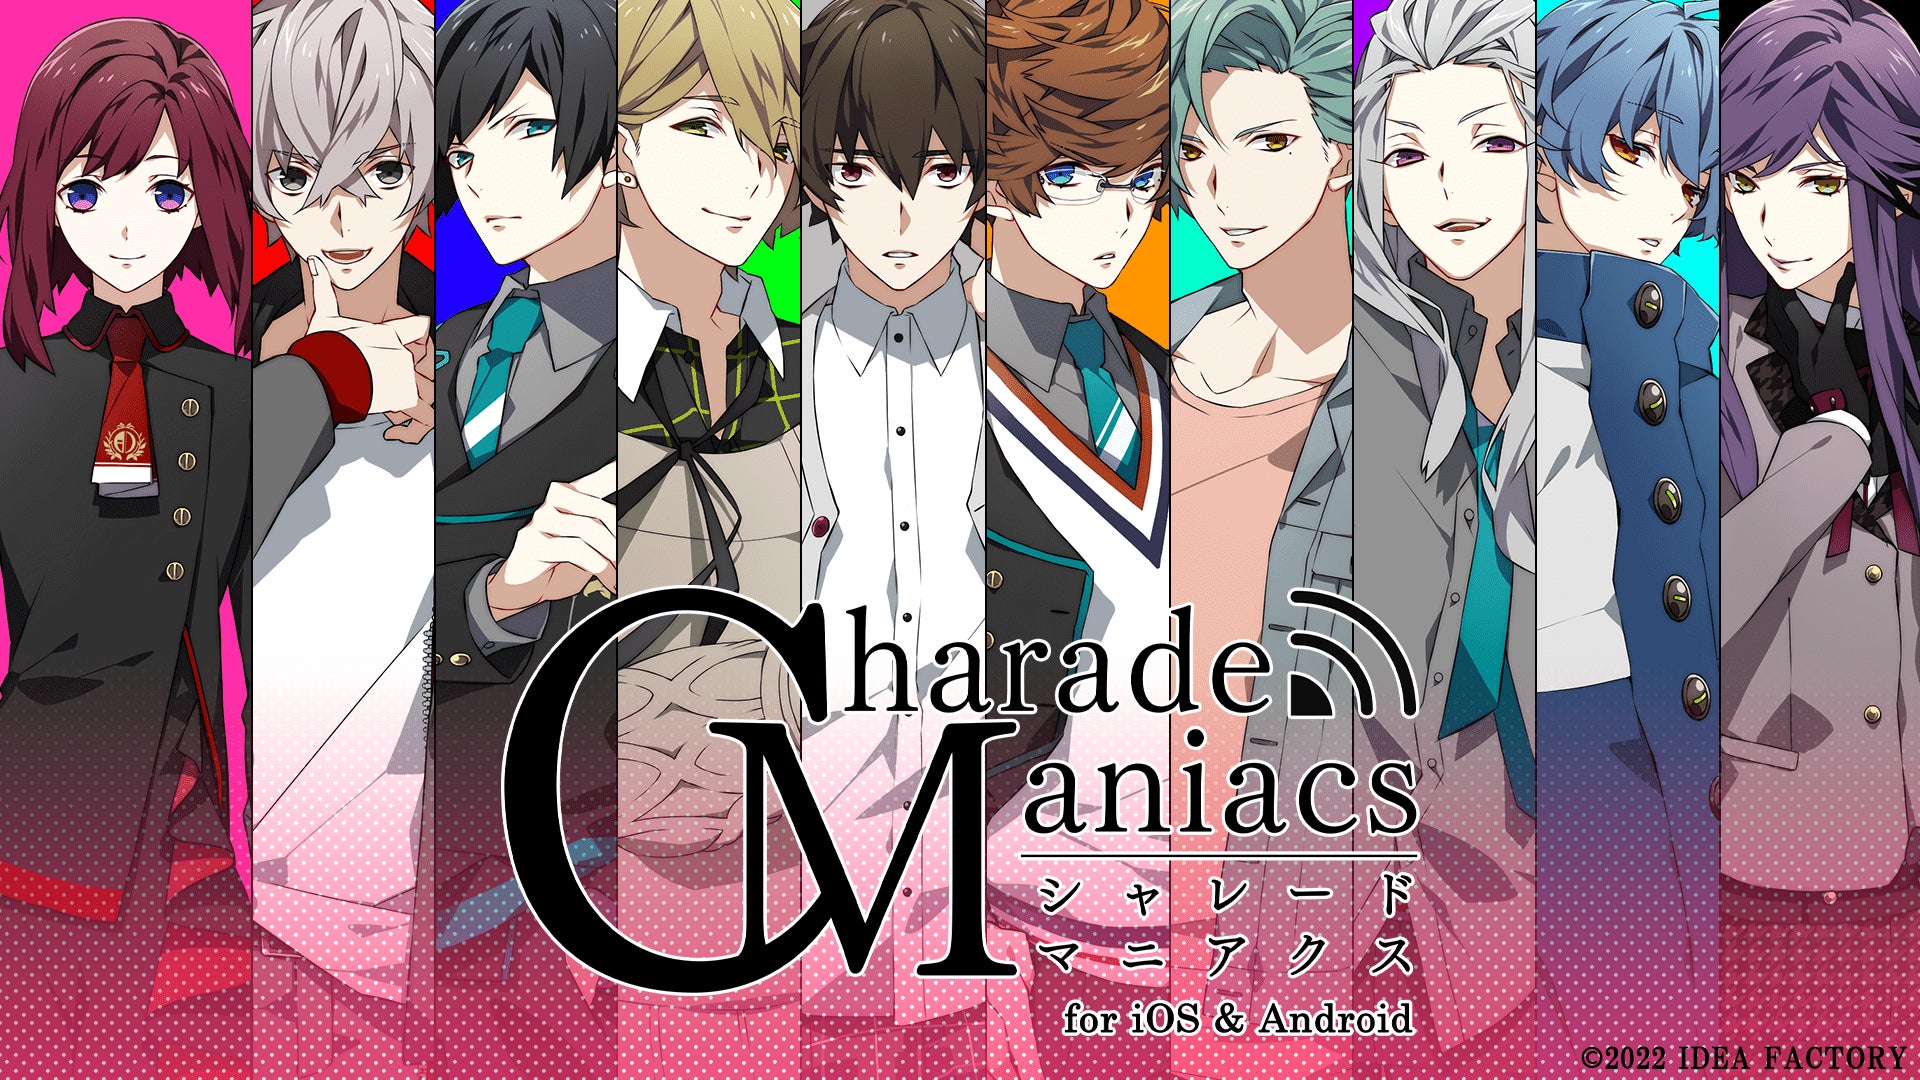 「CharadeManiacs for iOS & Android」配信開始！